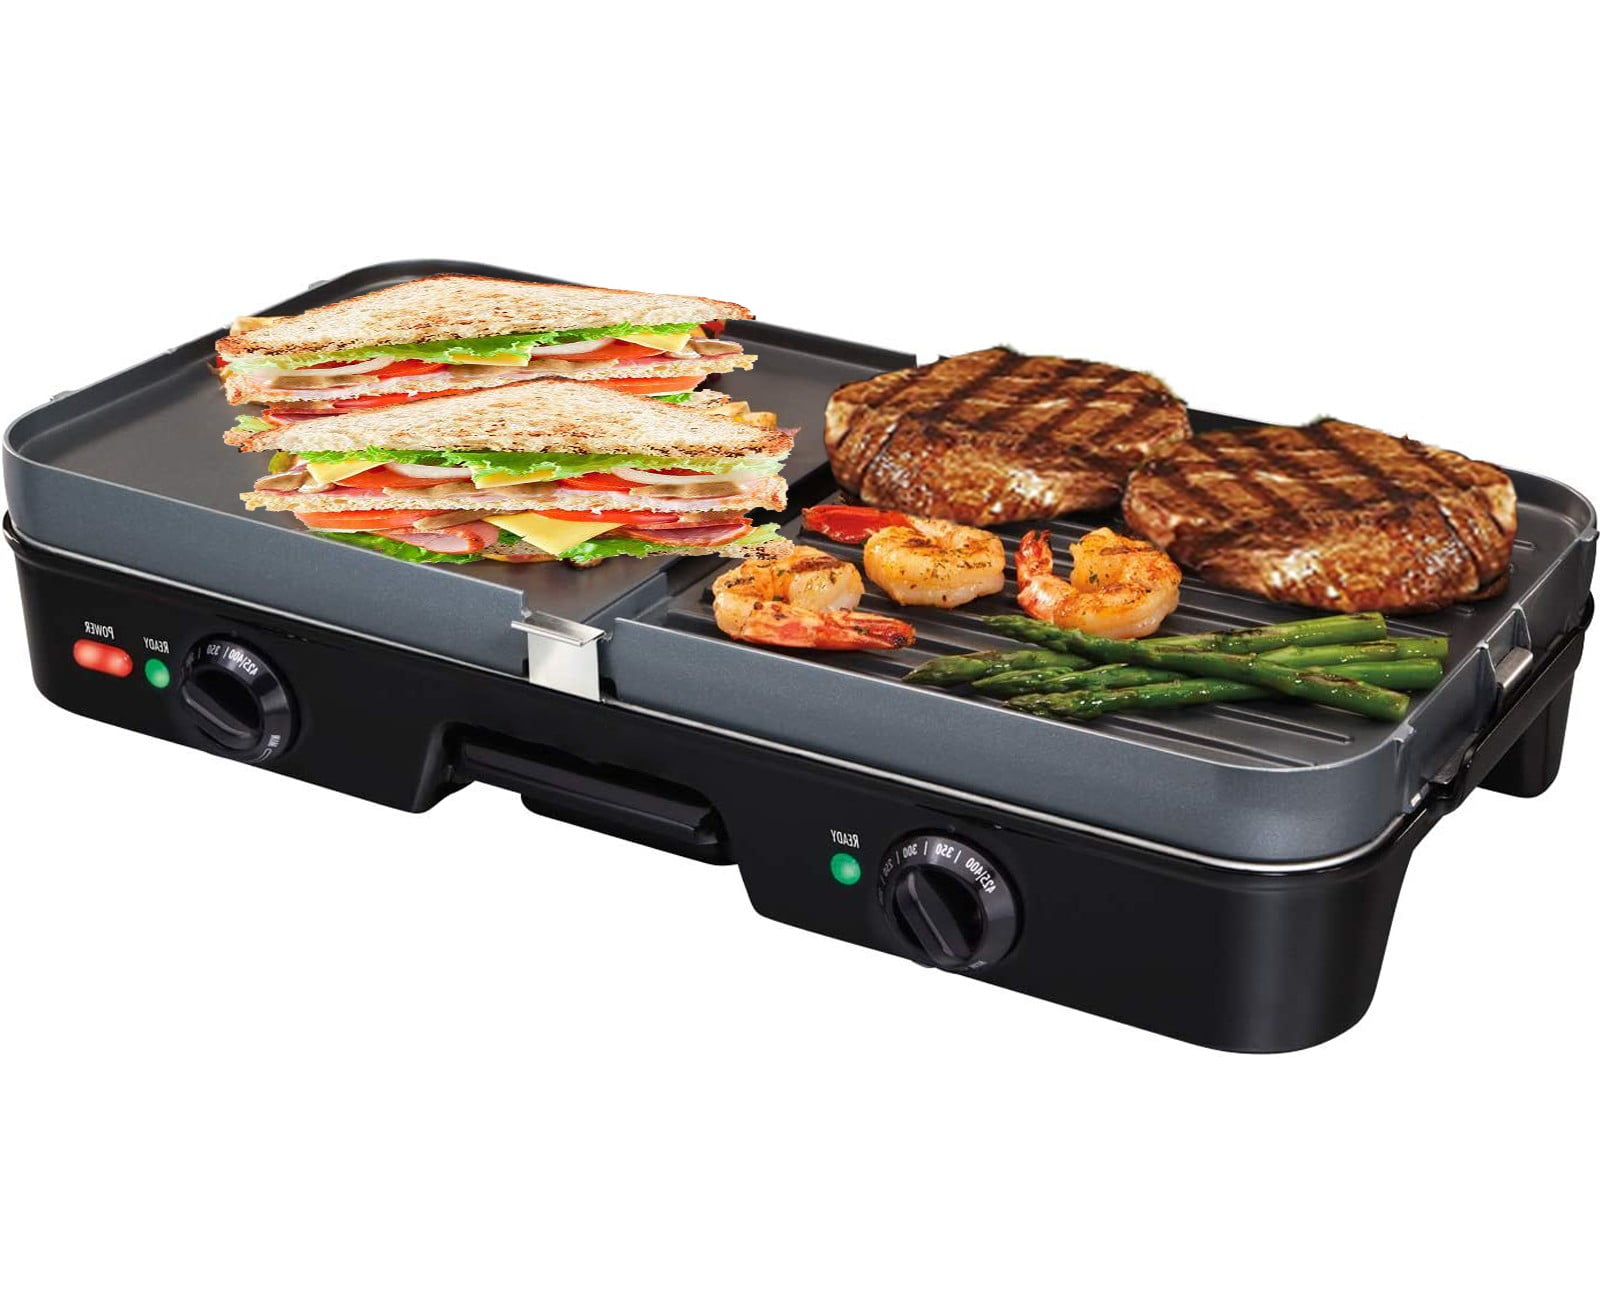 3-In-1 Electric Griddle Durable Non-Stick with Removable Tray Kitchen